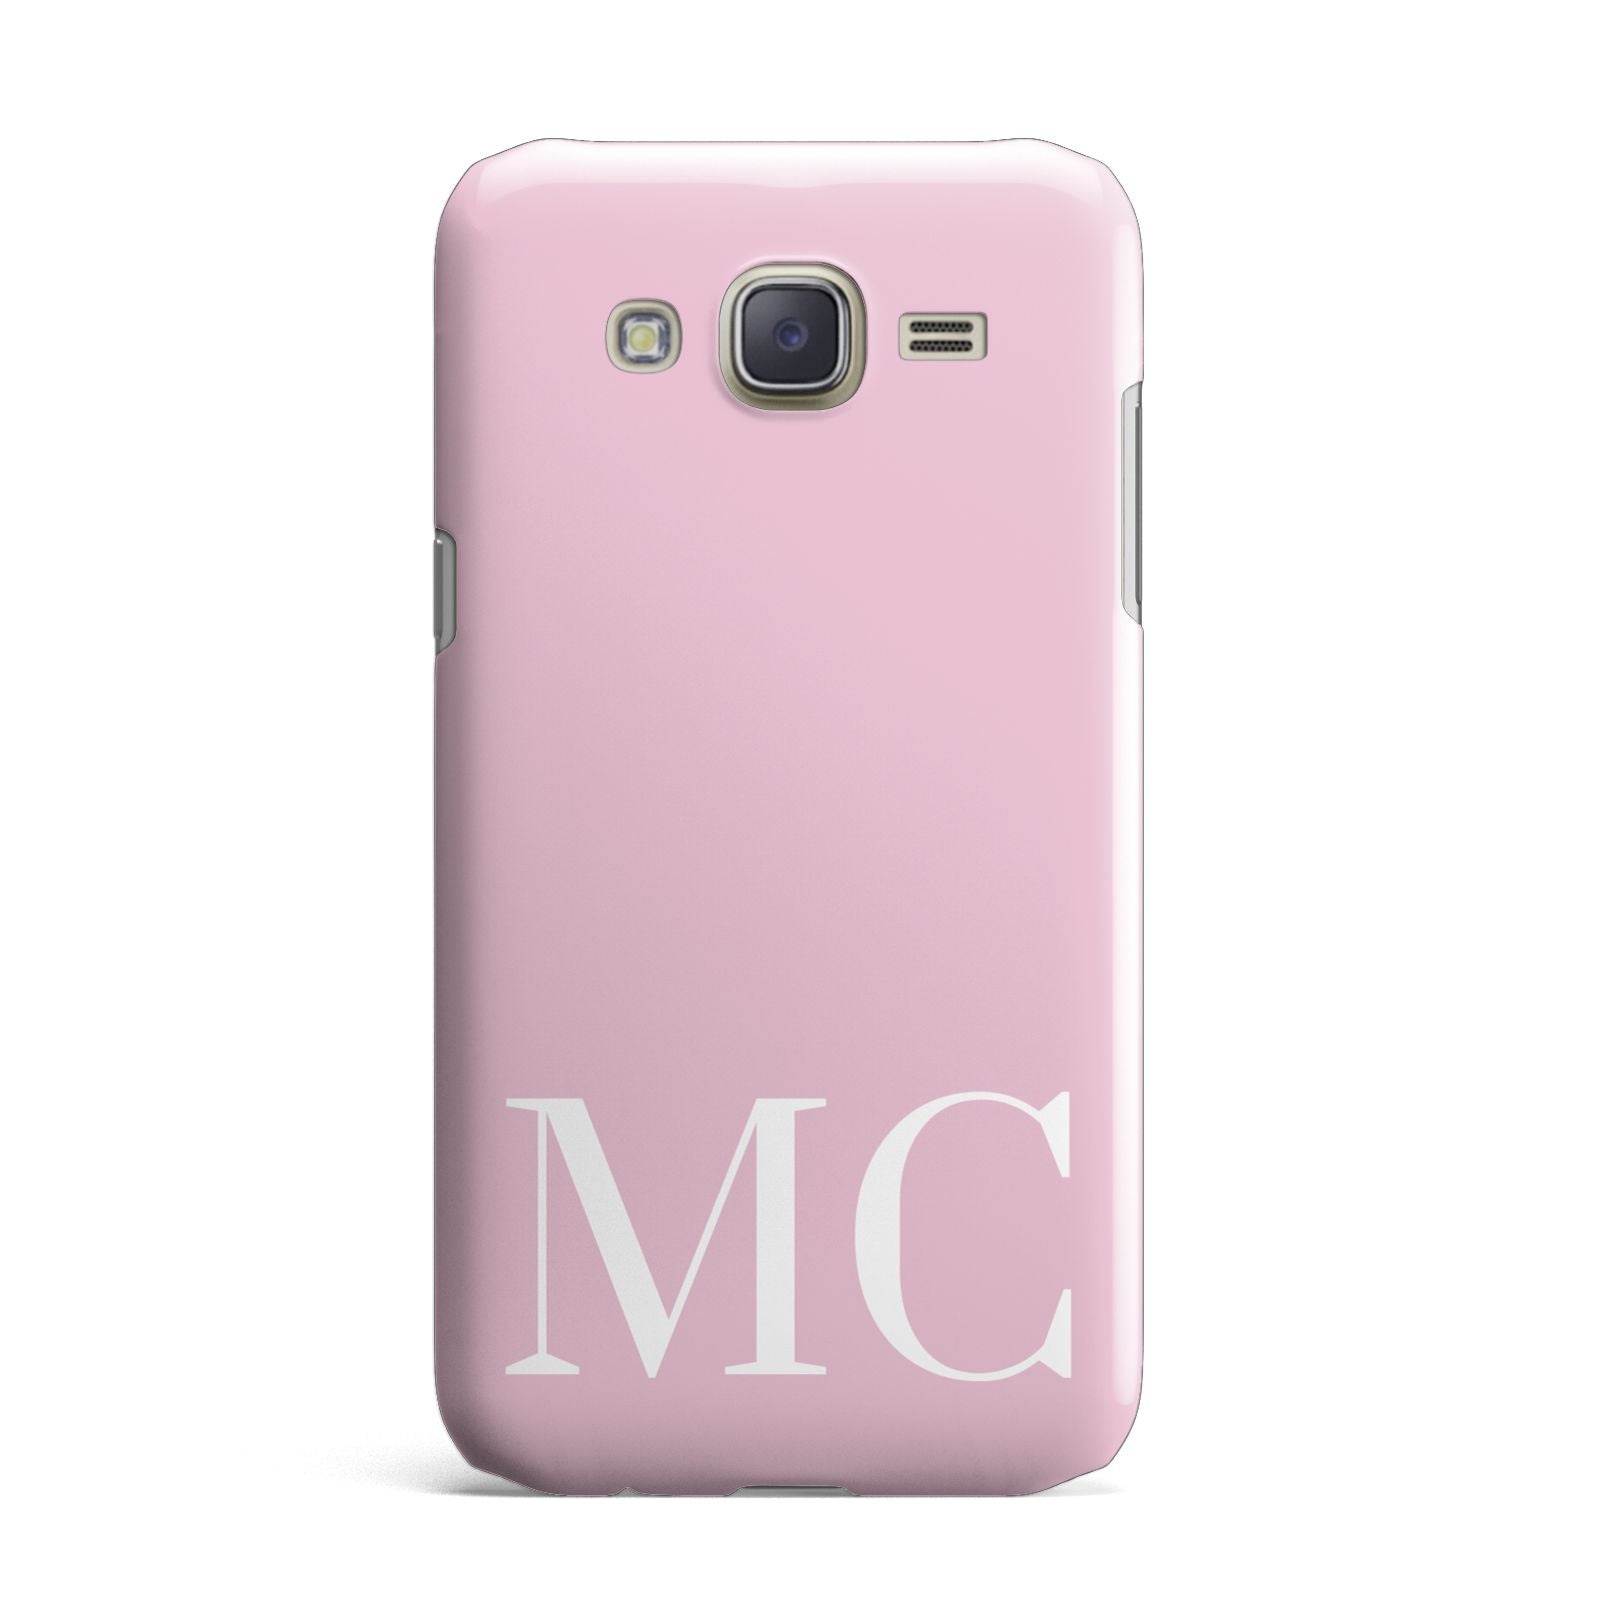 Initials Personalised 2 Samsung Galaxy J7 Case